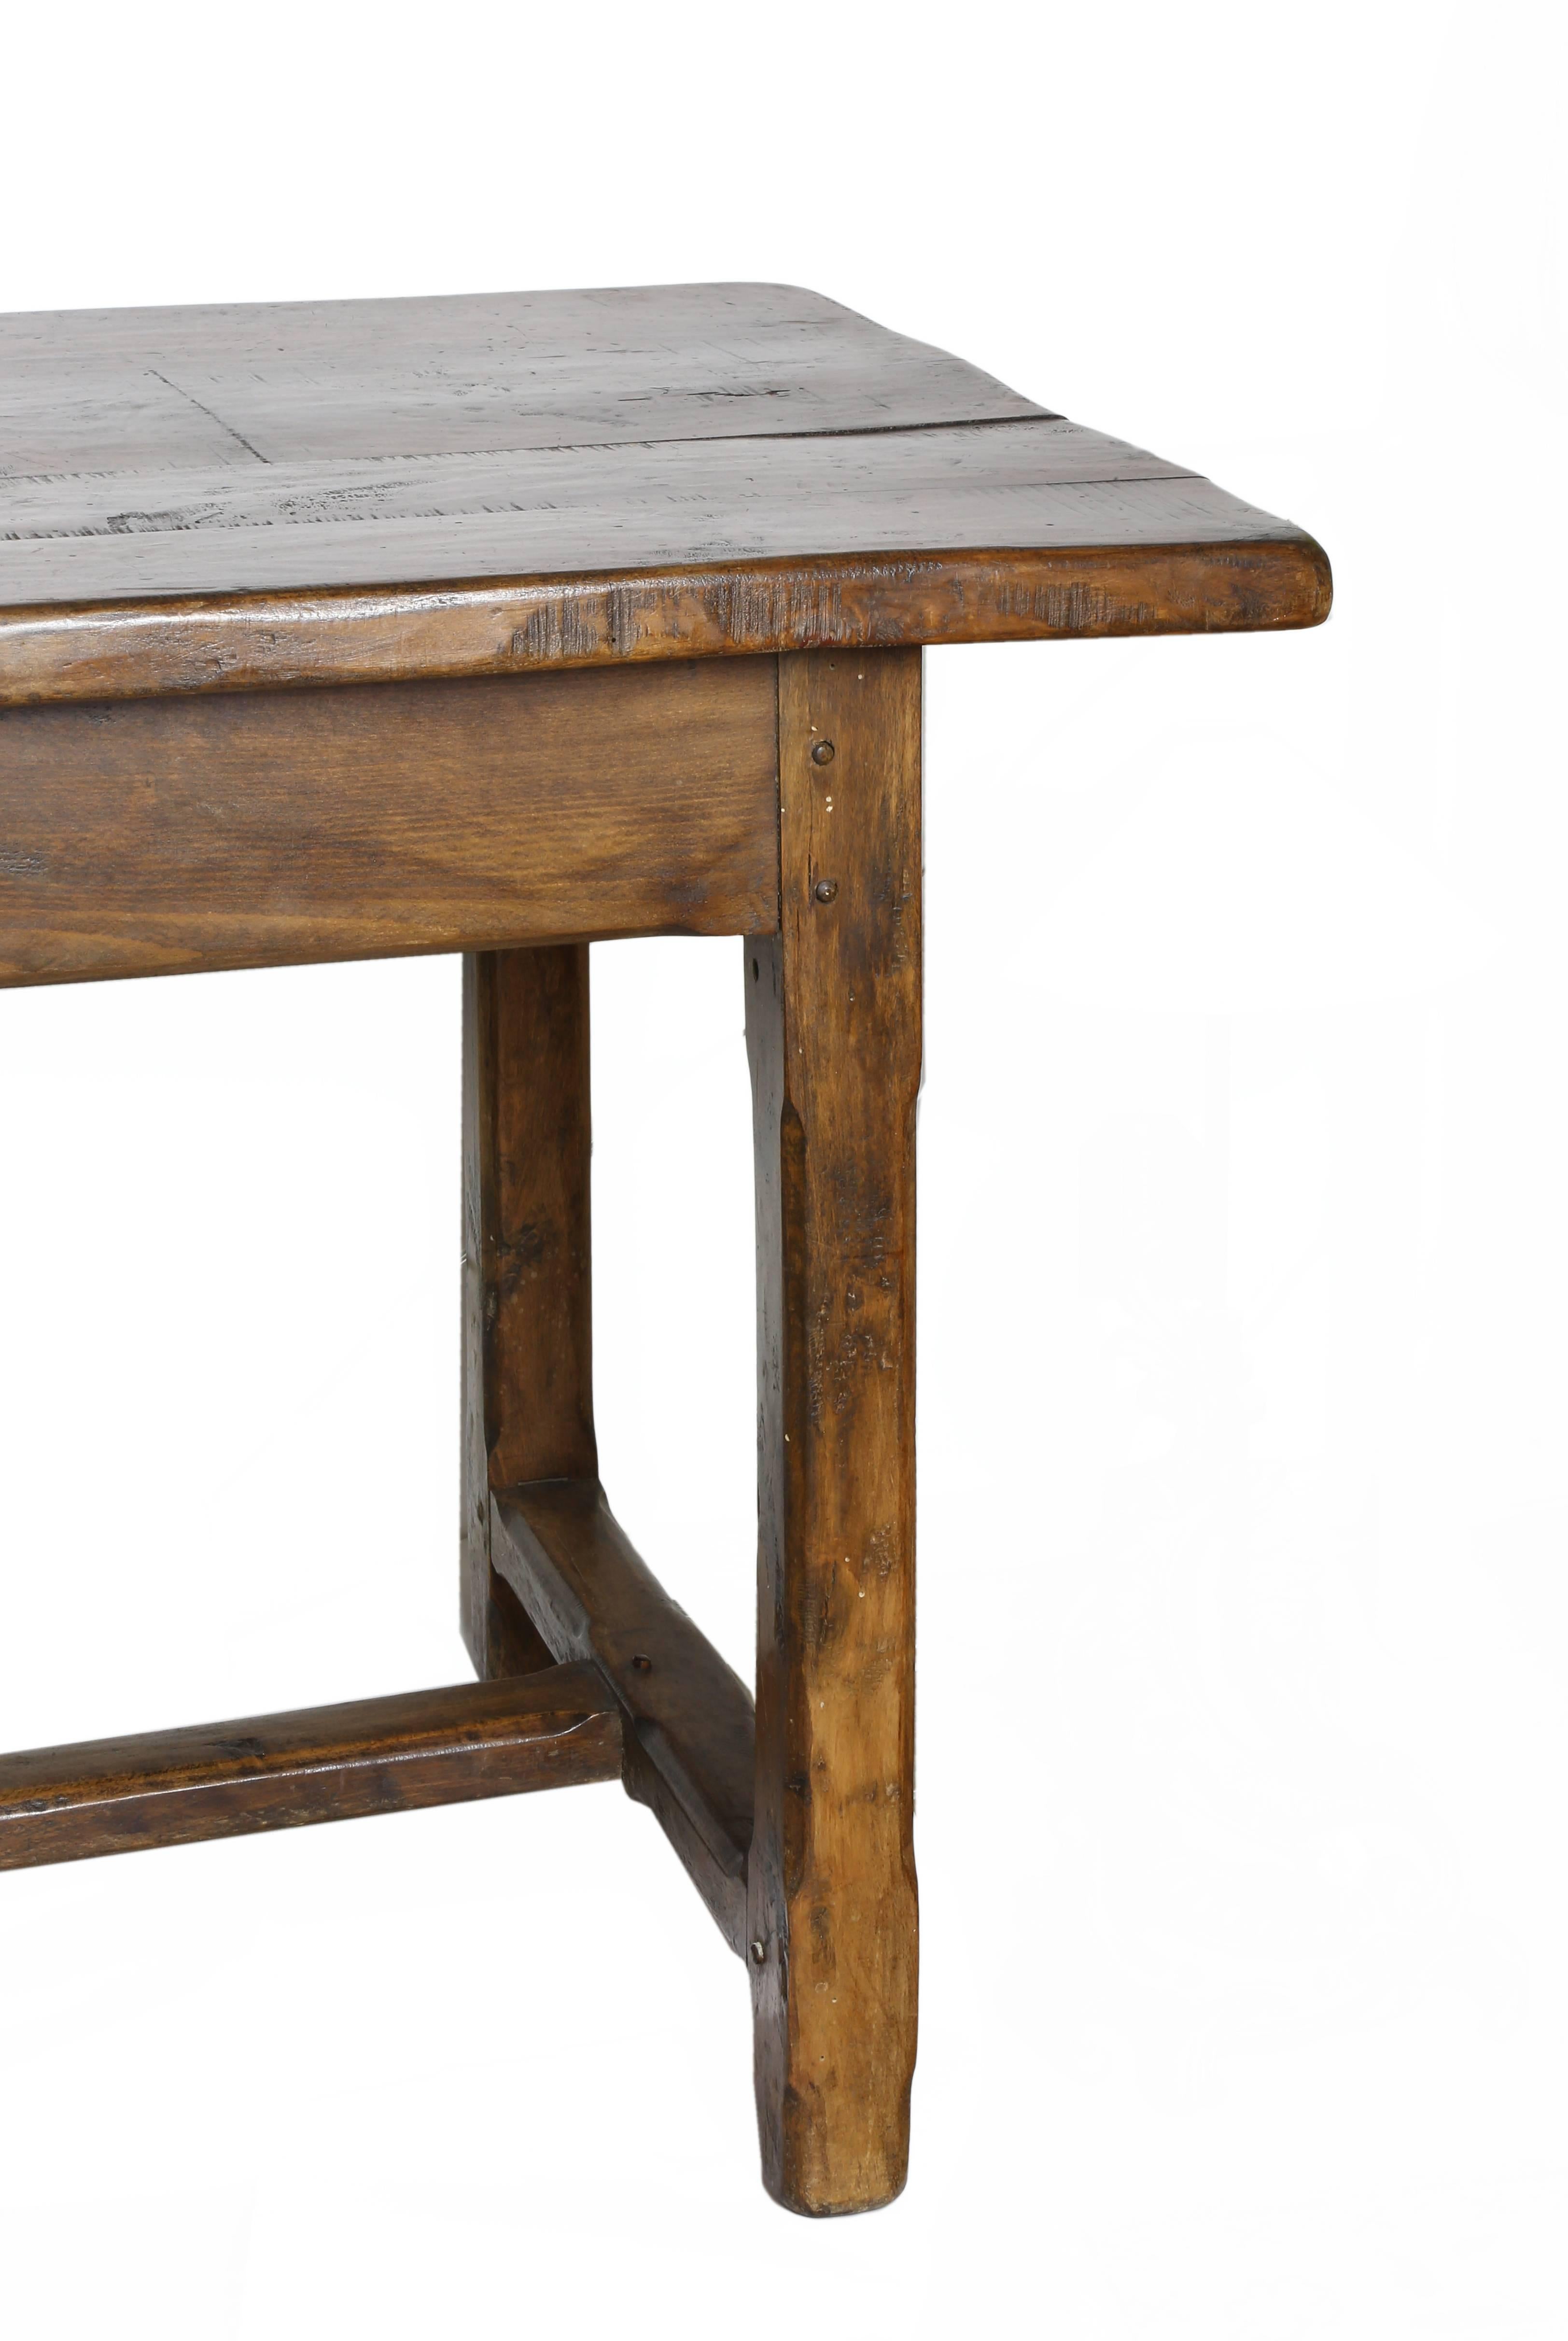 French carved walnut farm table, 19th century, four planks on the long rectangular top, rising on a stretcher base, approx 30.5